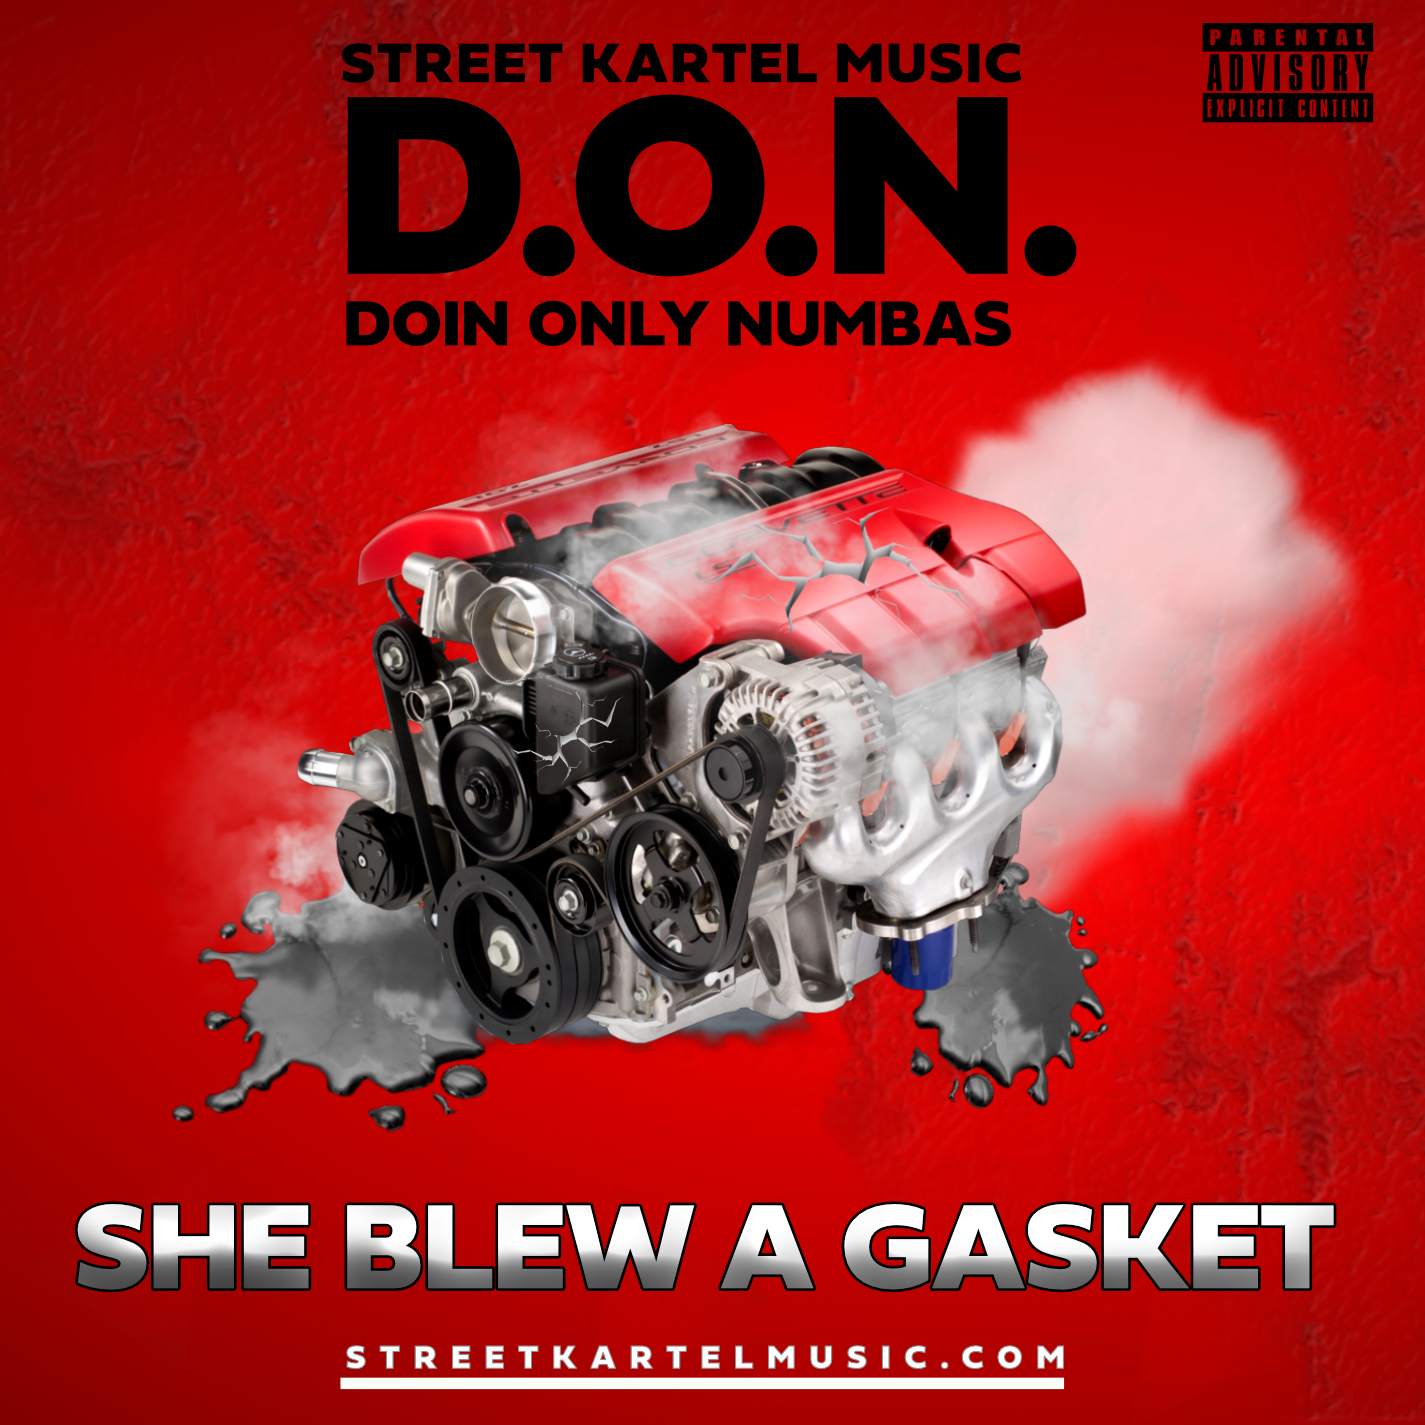 [Single] @DOINONLYNUMBAS ‘She Blew A Gasket’